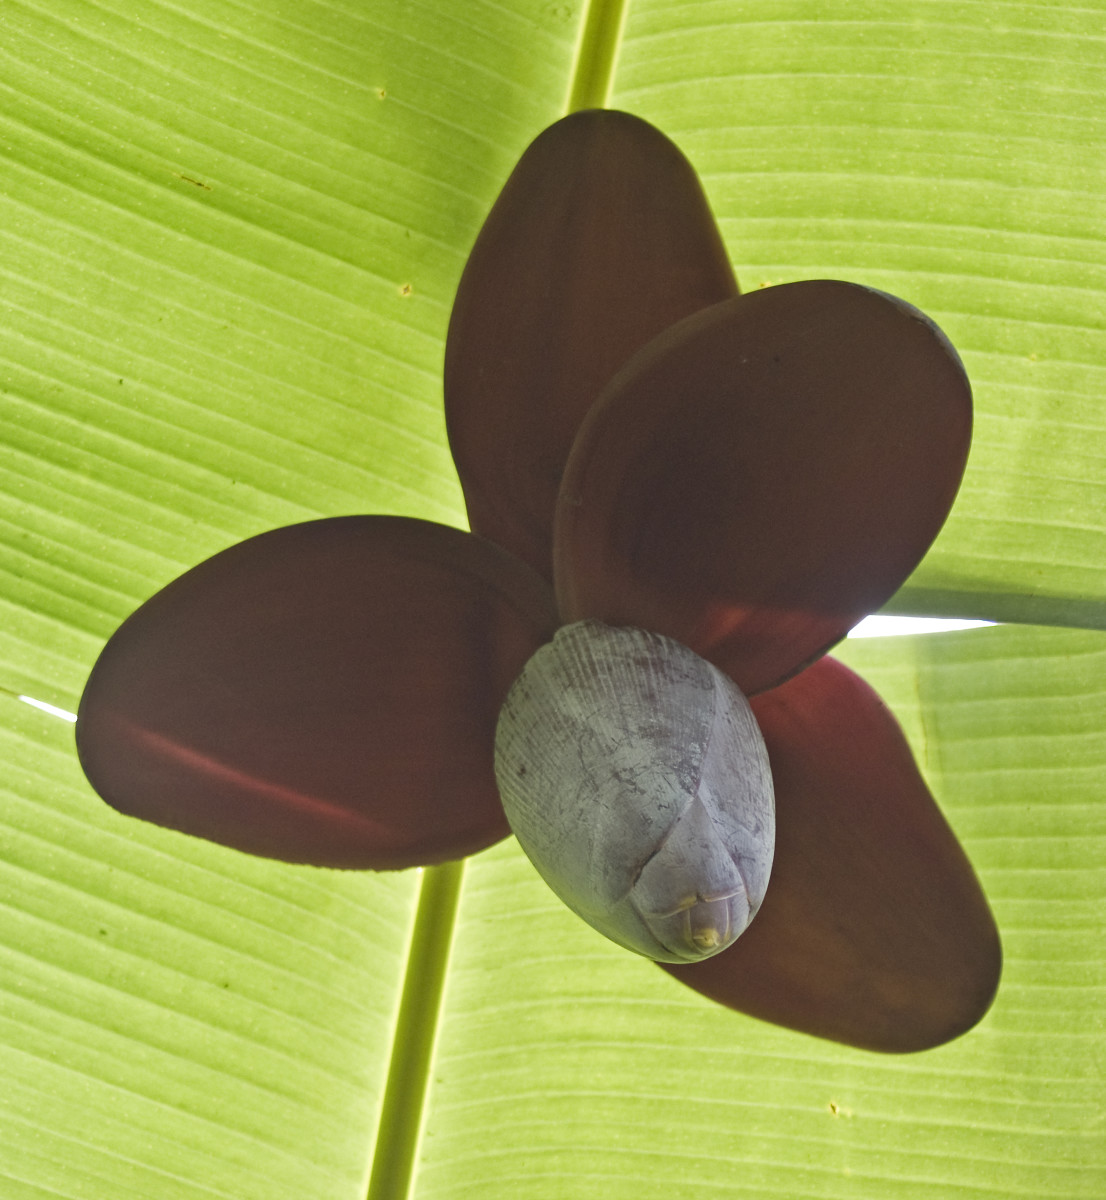 The sepals of a plantain flower opening under the shade of a leaf.